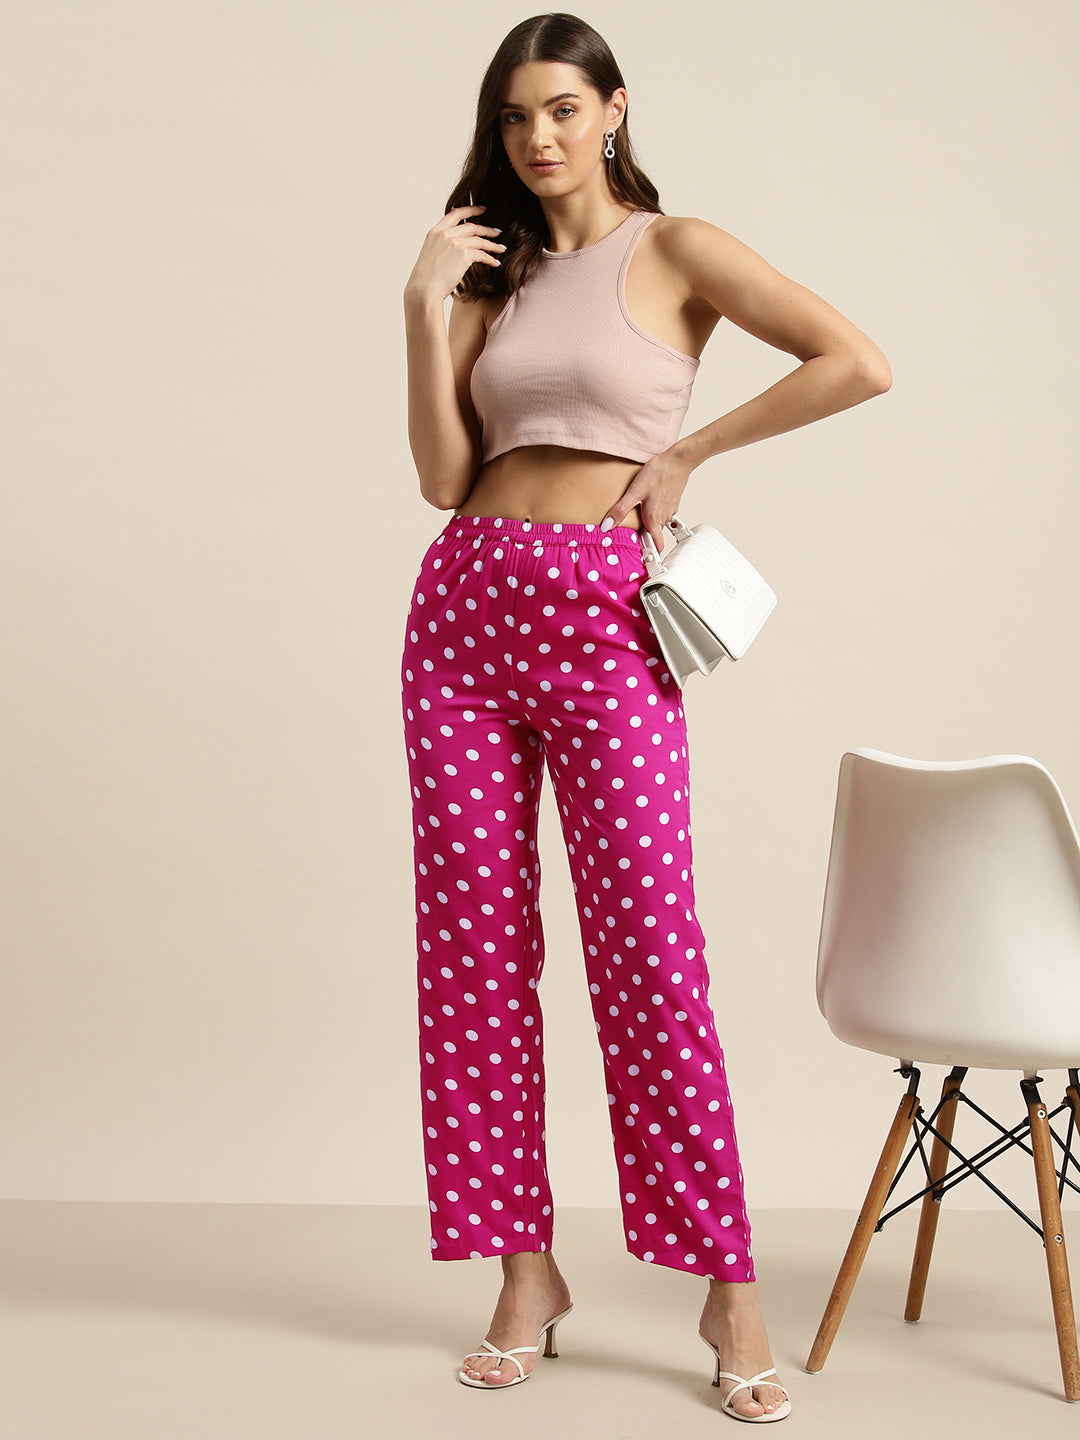 Hot pink and white polka dot trousers